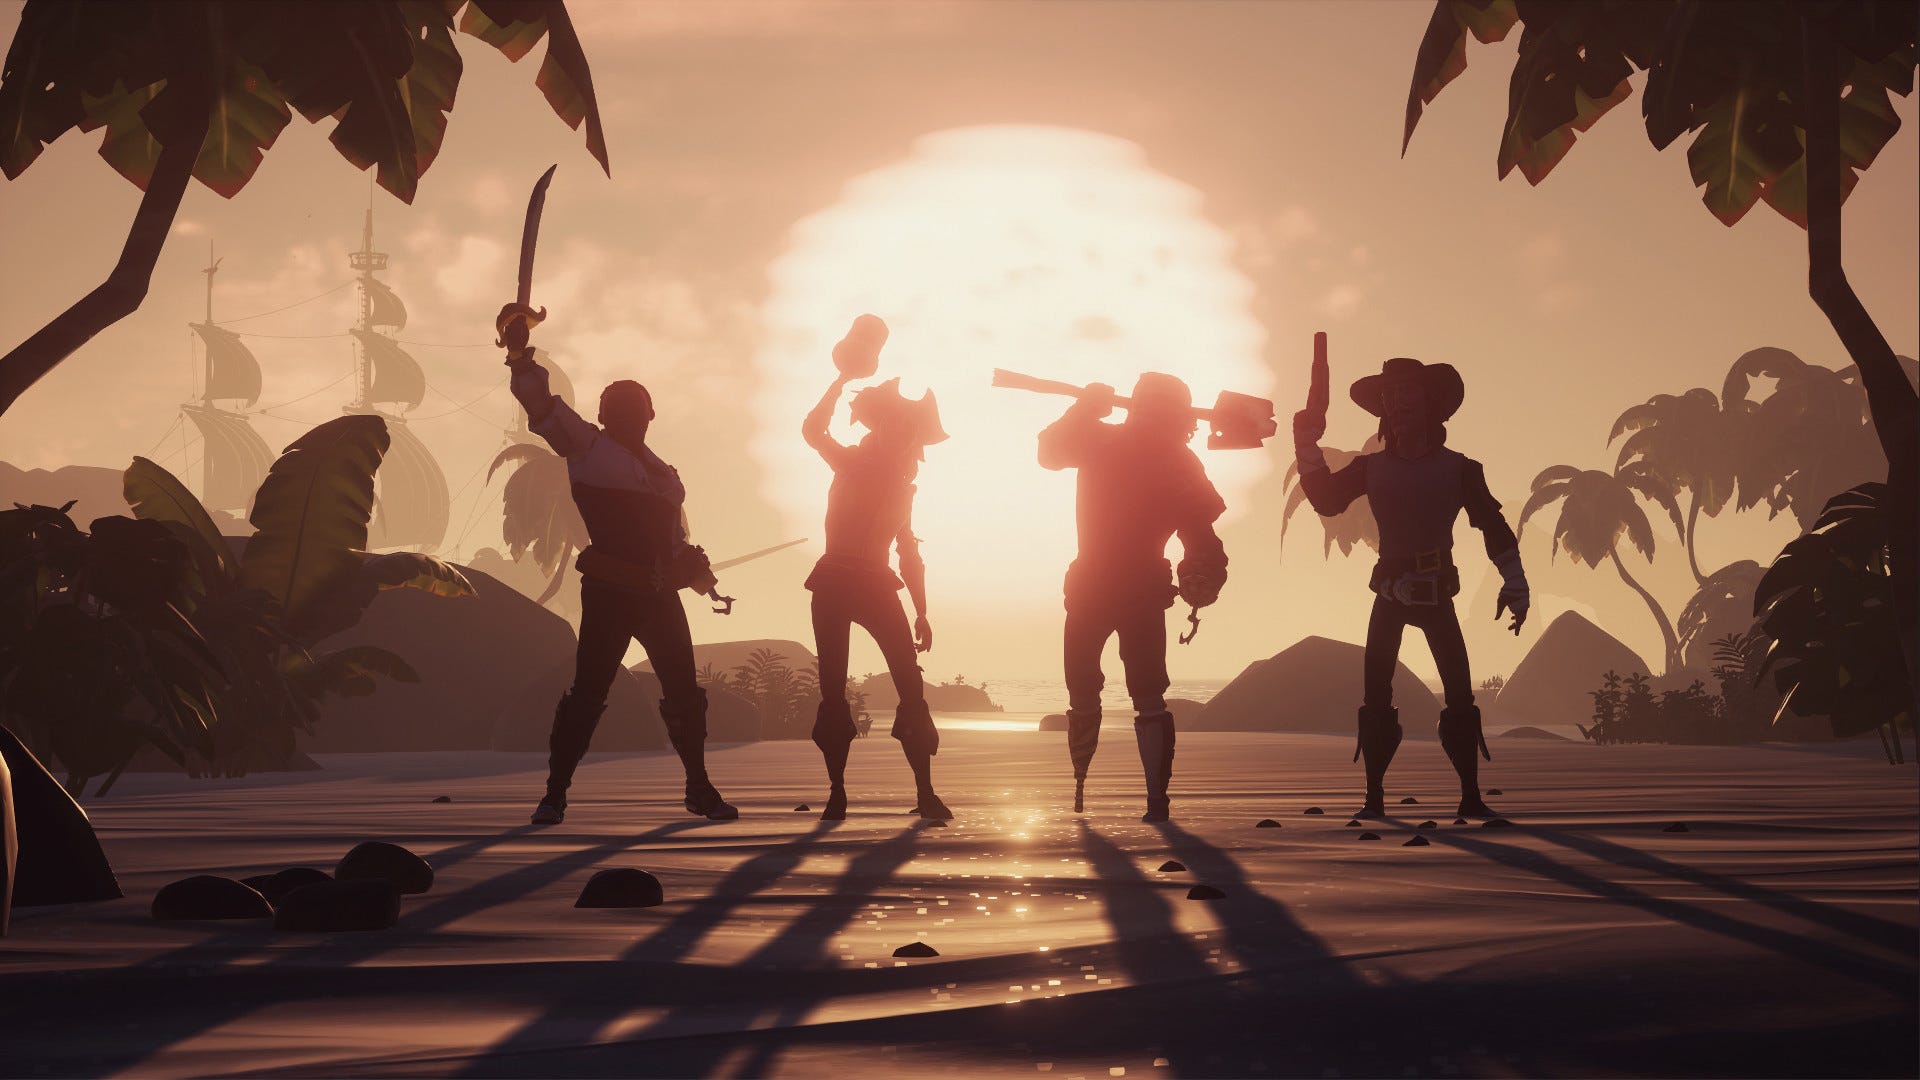 Sea of Thieves’ next update brings in anti-cheat, solo-play Safer Seas changes, and plenty more